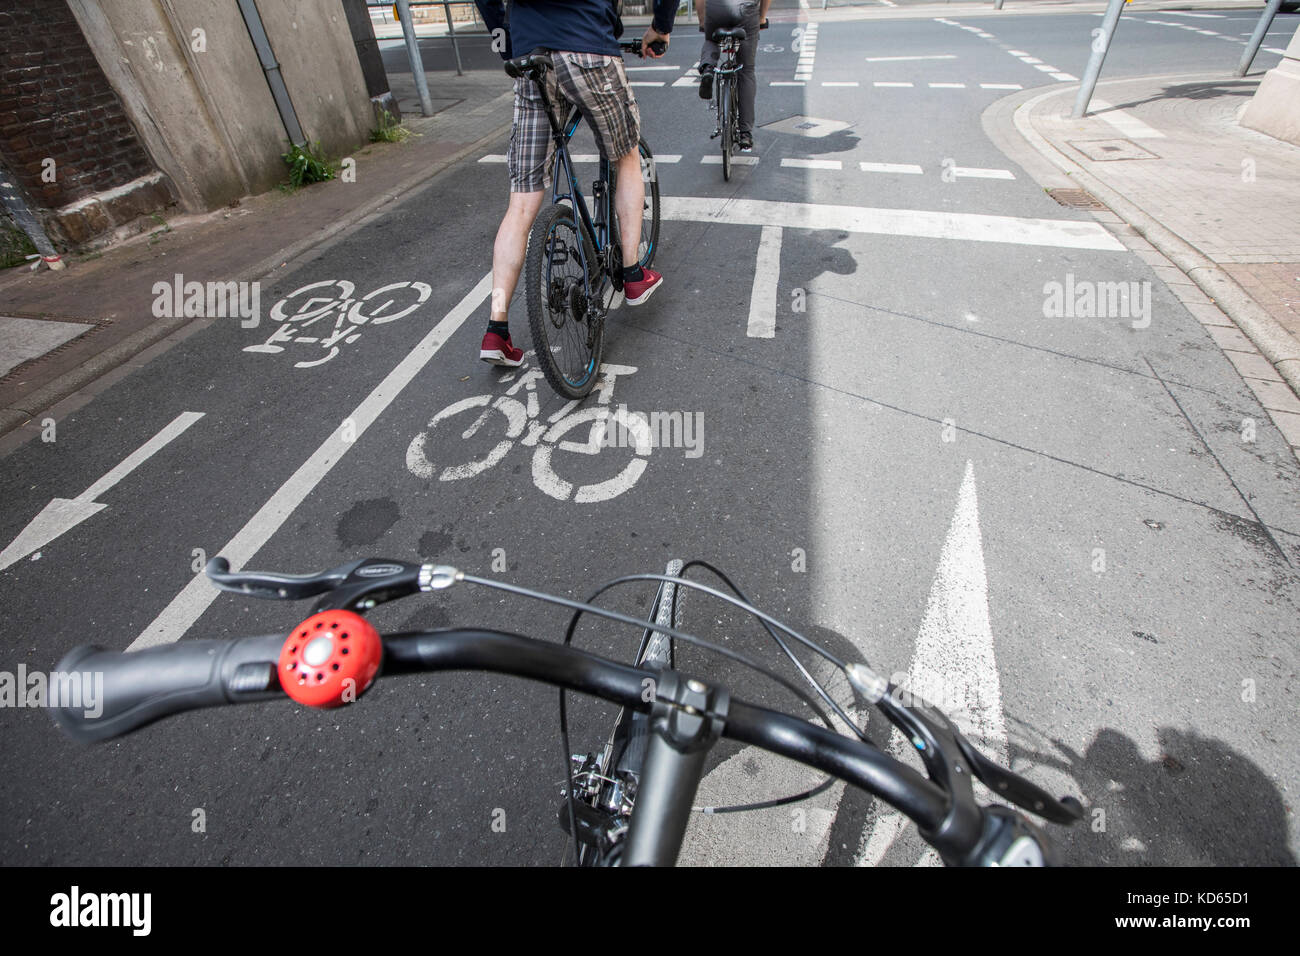 Cycling in a city, special road marks for bicycle lanes, Stock Photo